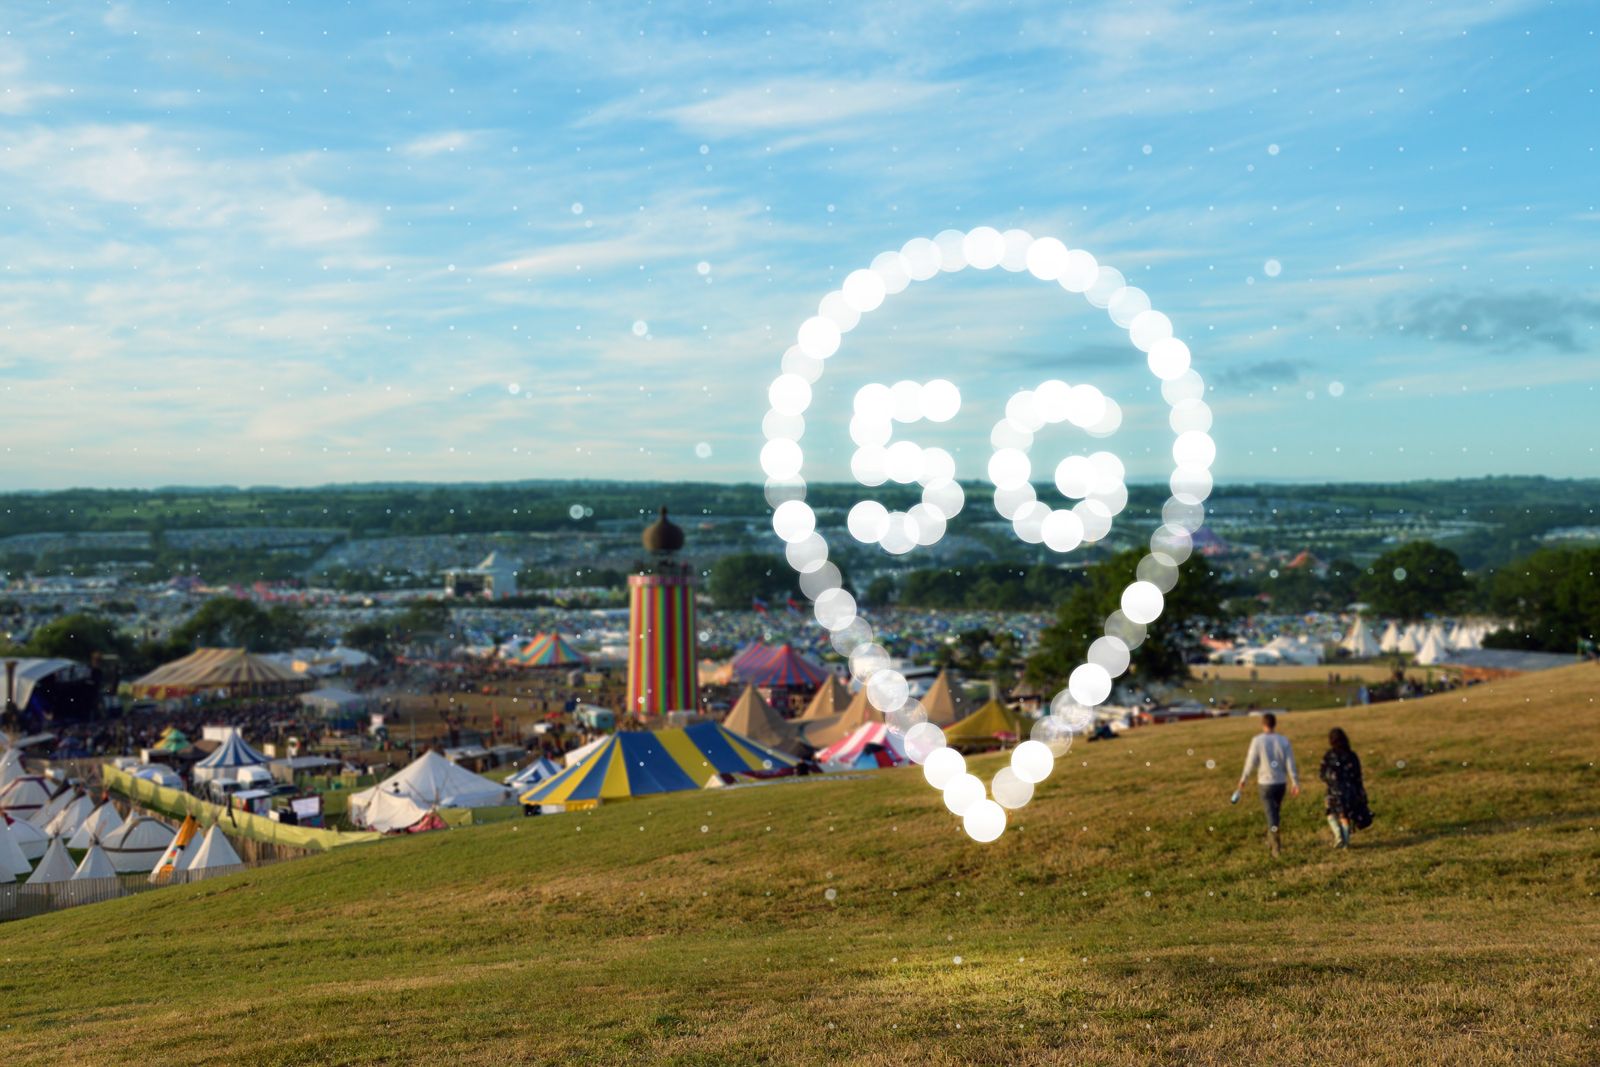 EEs 5G network at Glastonbury is the biggest temporary 5G installation image 1